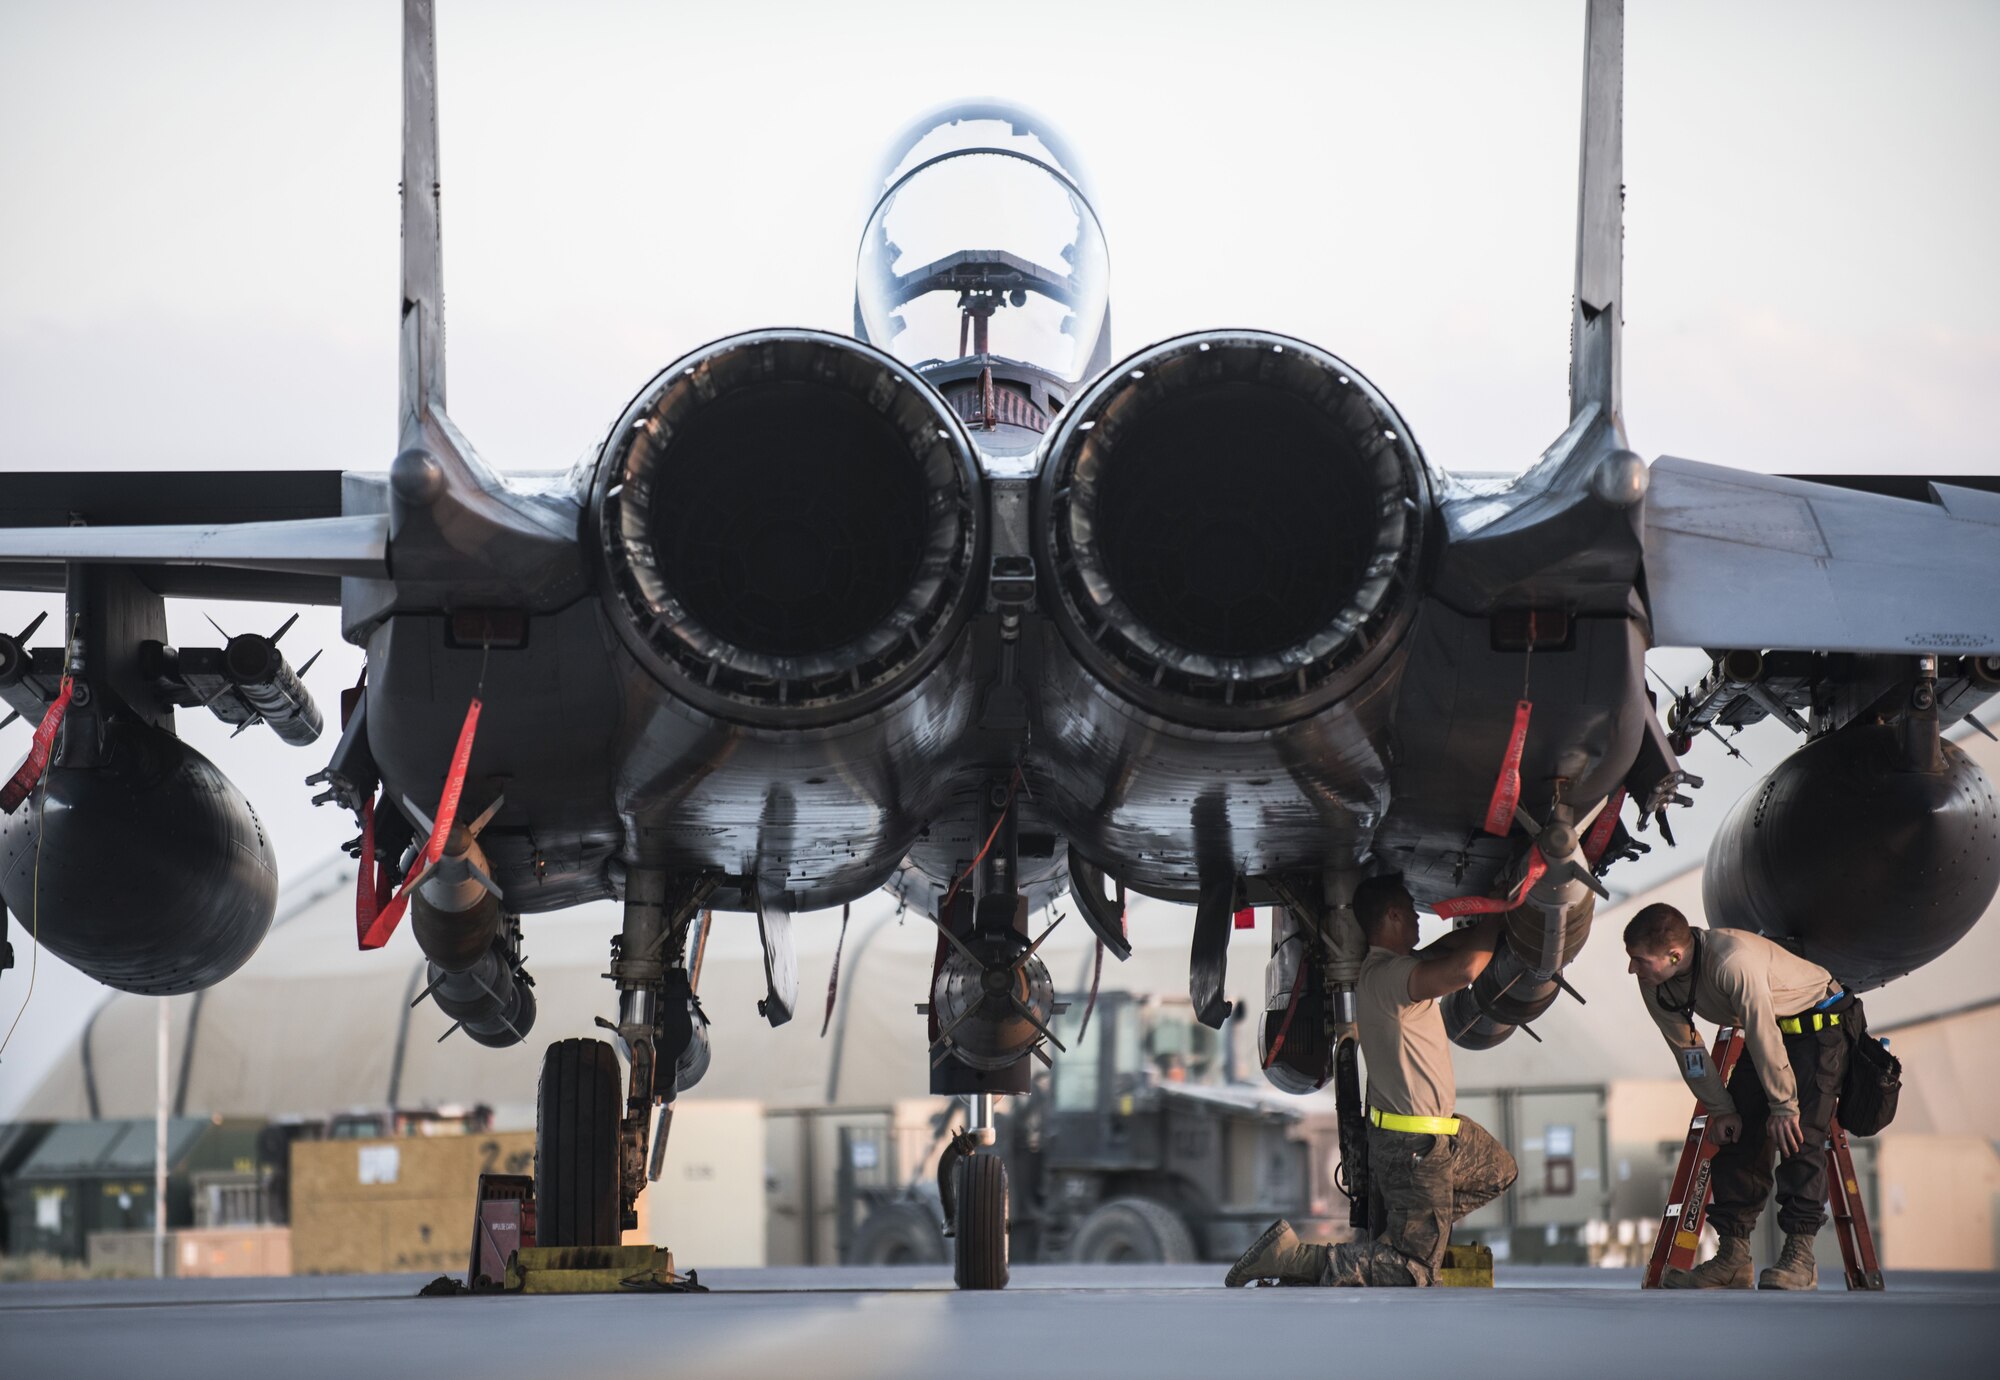 Airmen assigned to the 332d Expeditionary Maintenance Squadron check the placement of munitions beneath an F-15E Strike Eagle November 10, 2017 in Southwest Asia. The 332d Air Expeditionary Wing was recently awarded the 2017 Clements McMullen Memorial Daedalian Weapons System Maintenance Trophy, recognizing it as Air Combat Command’s premier large aircraft maintenance component. (U.S. Air Force photo by Staff Sgt. Joshua Kleinholz)